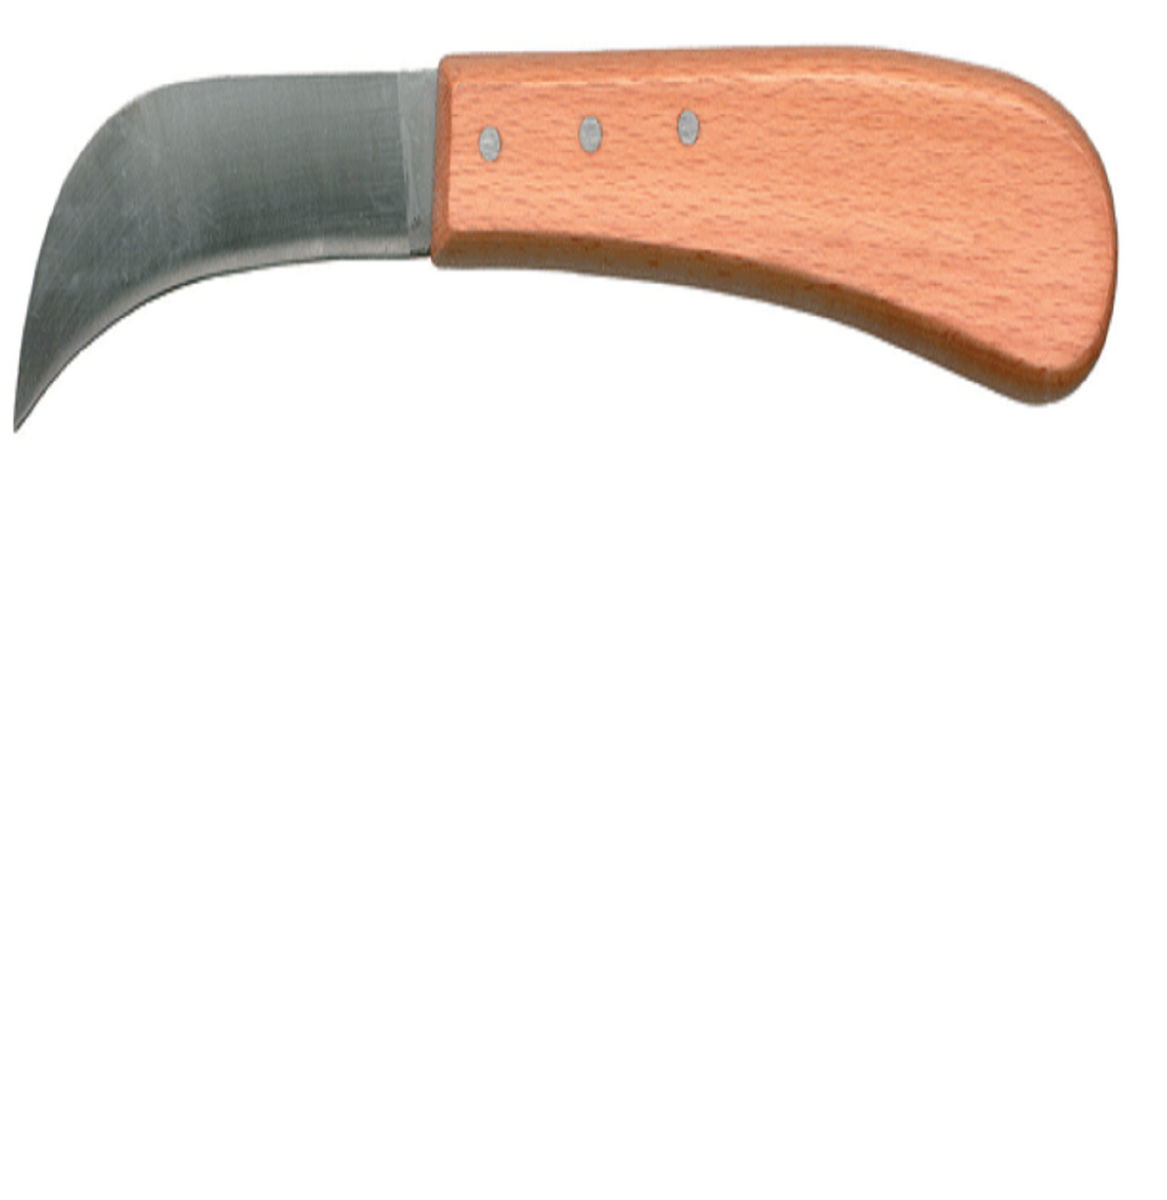 Crain 103 Carpet Knife with 3-Inch Blade and Wood Handle - Carpet